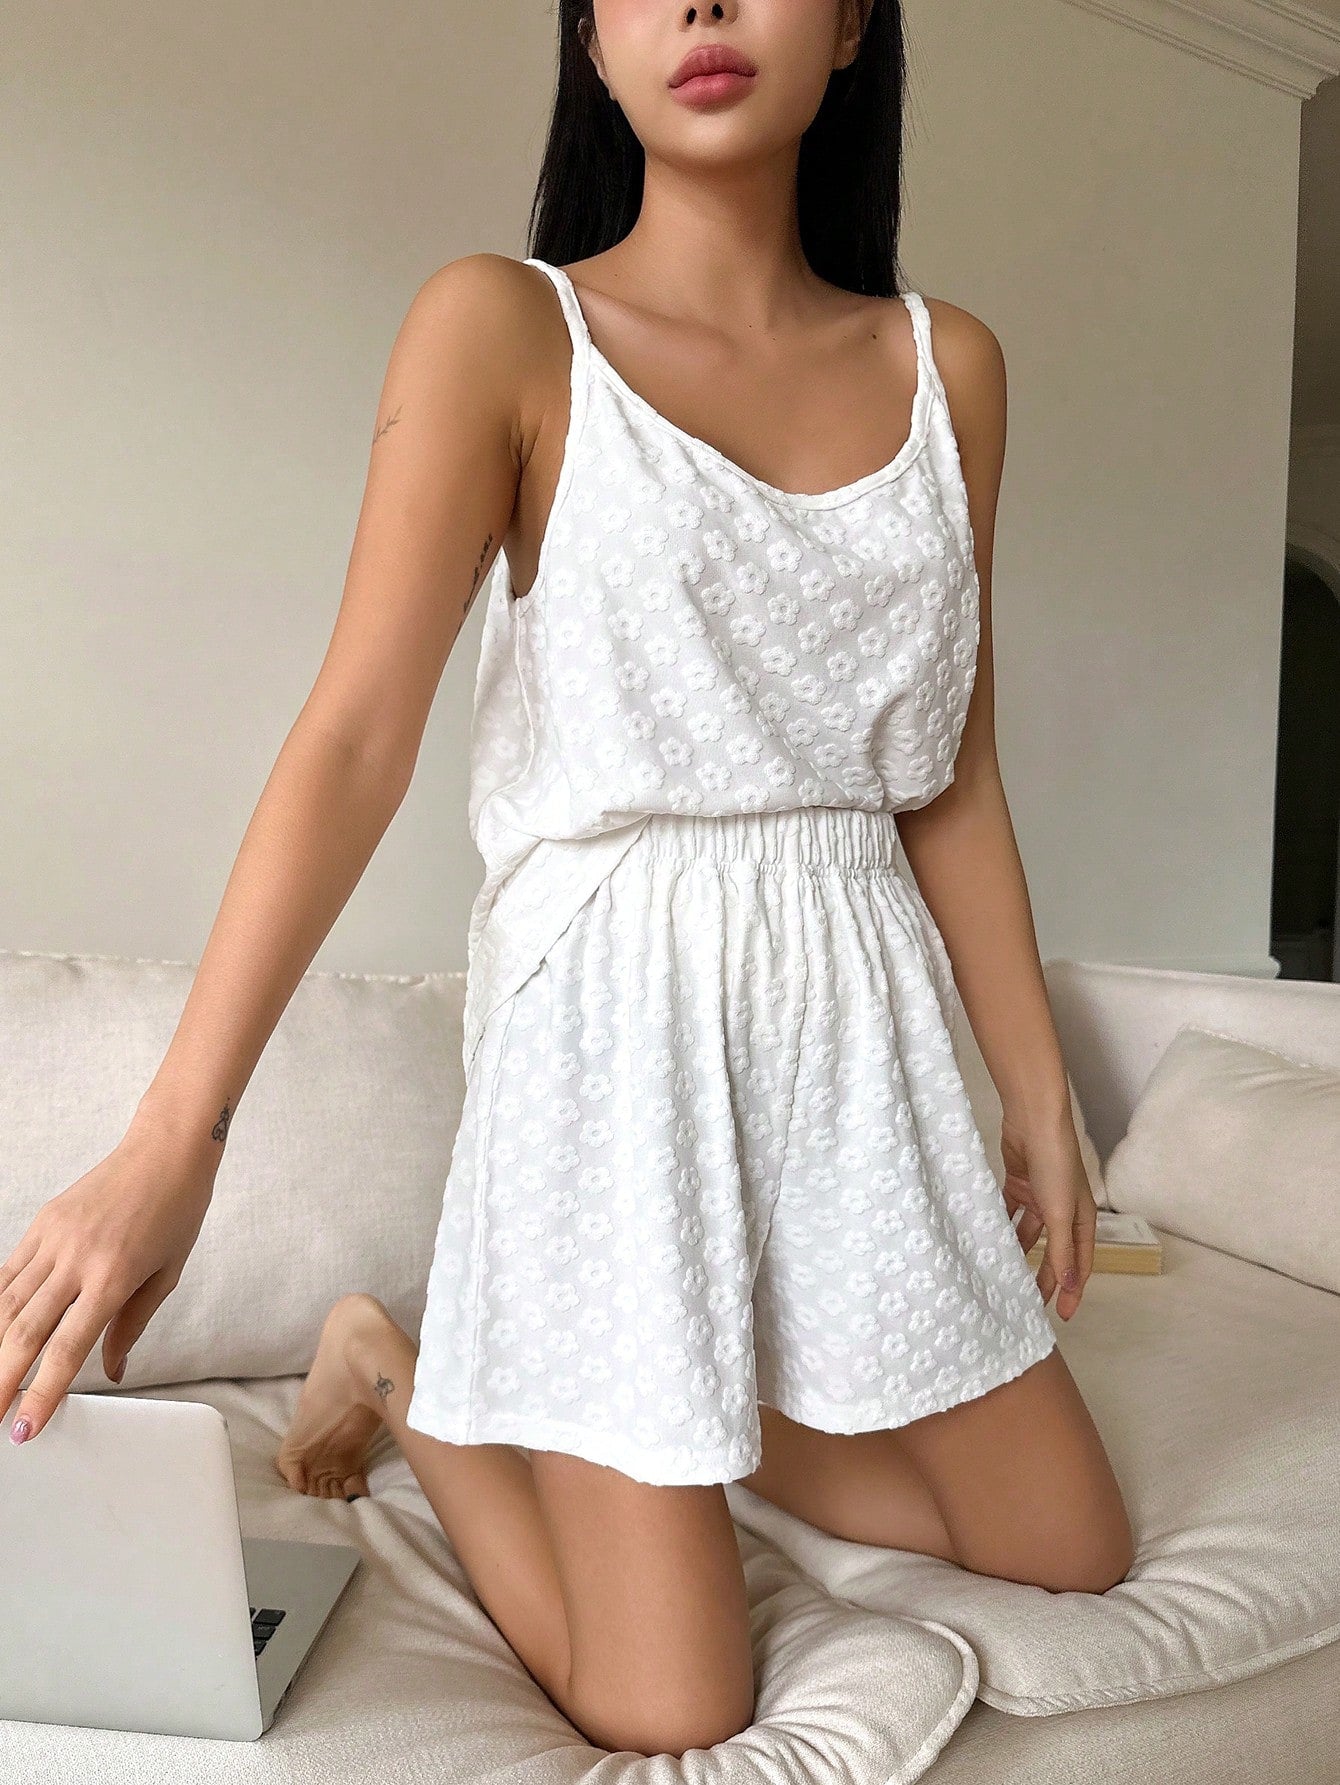 Ladies' Solid Color 3d Jacquard Texture Fabric Camisole Top & Shorts Homewear Set, Suitable For Summer